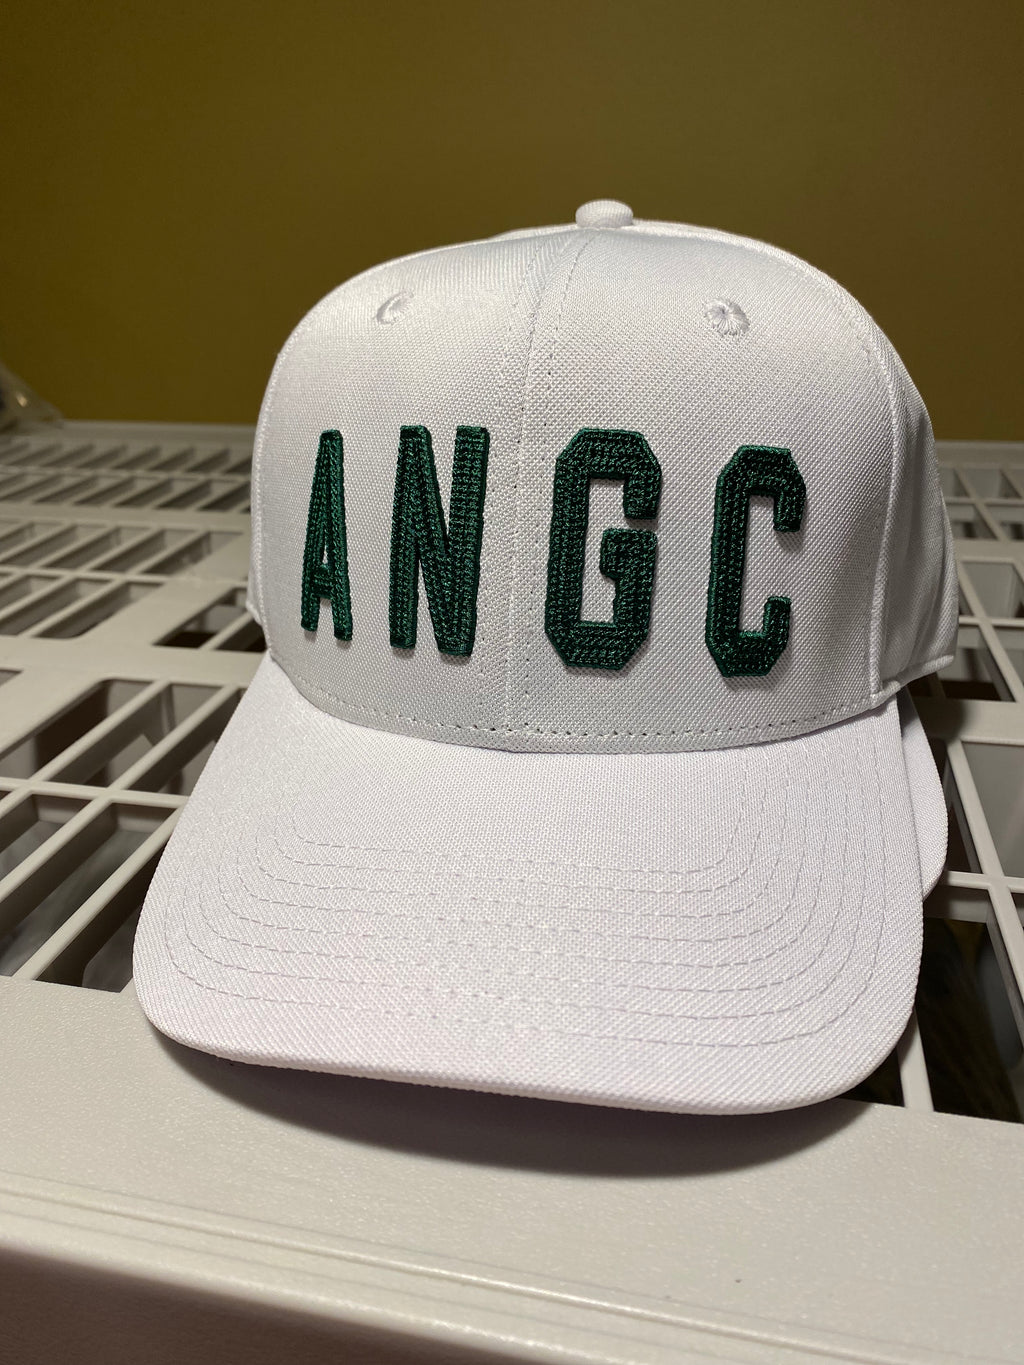 ANGC - *Arkansas Natural Golf Club* Raised Chainstitched Hat - White